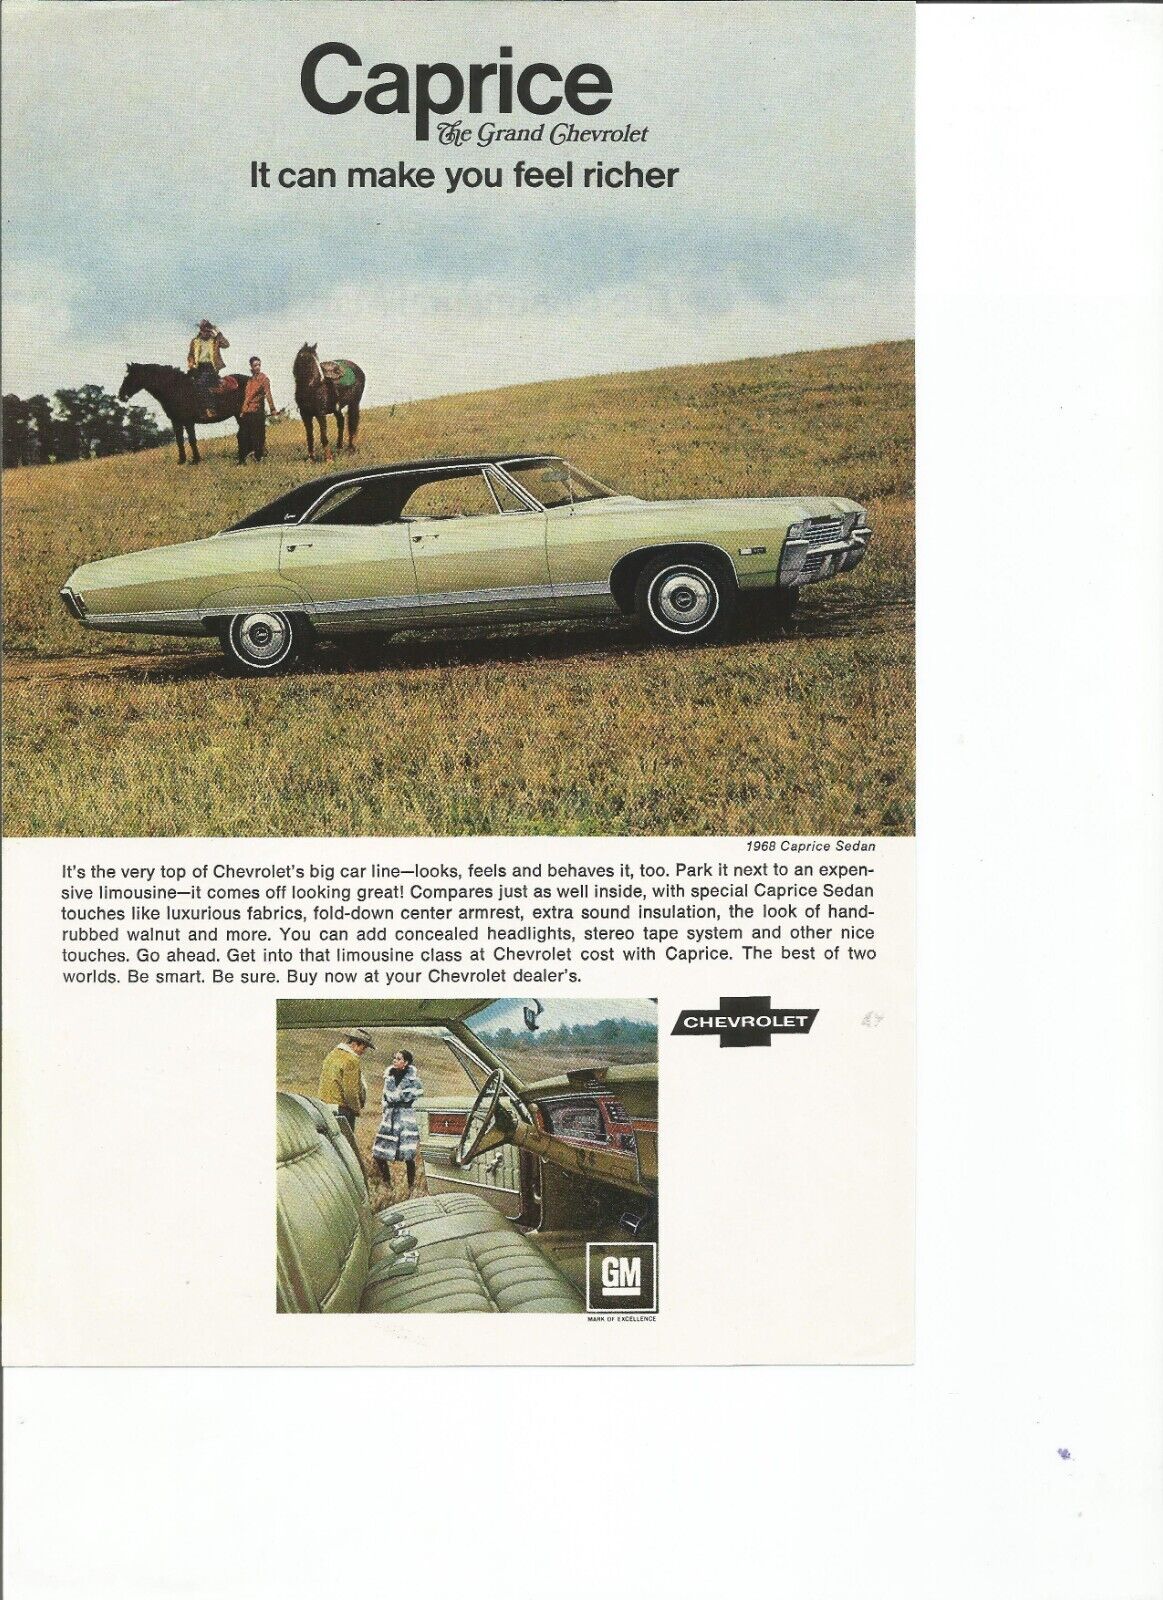 Two 1968 Chevrolet Caprice vintage print ad (ads): \